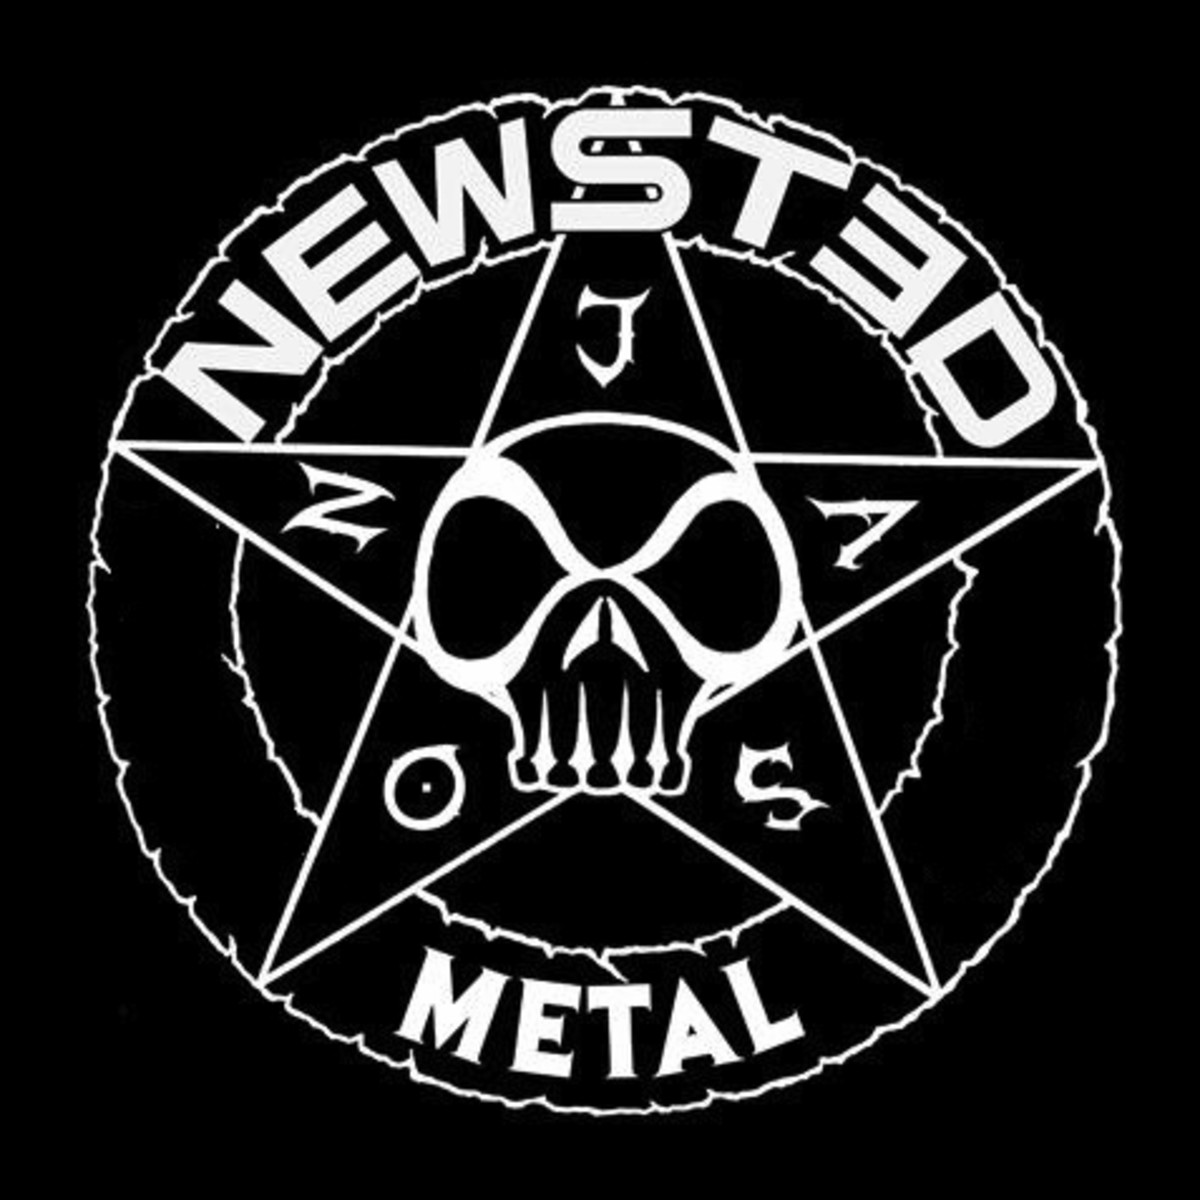 The cover to Newsted's new album, titled Metal